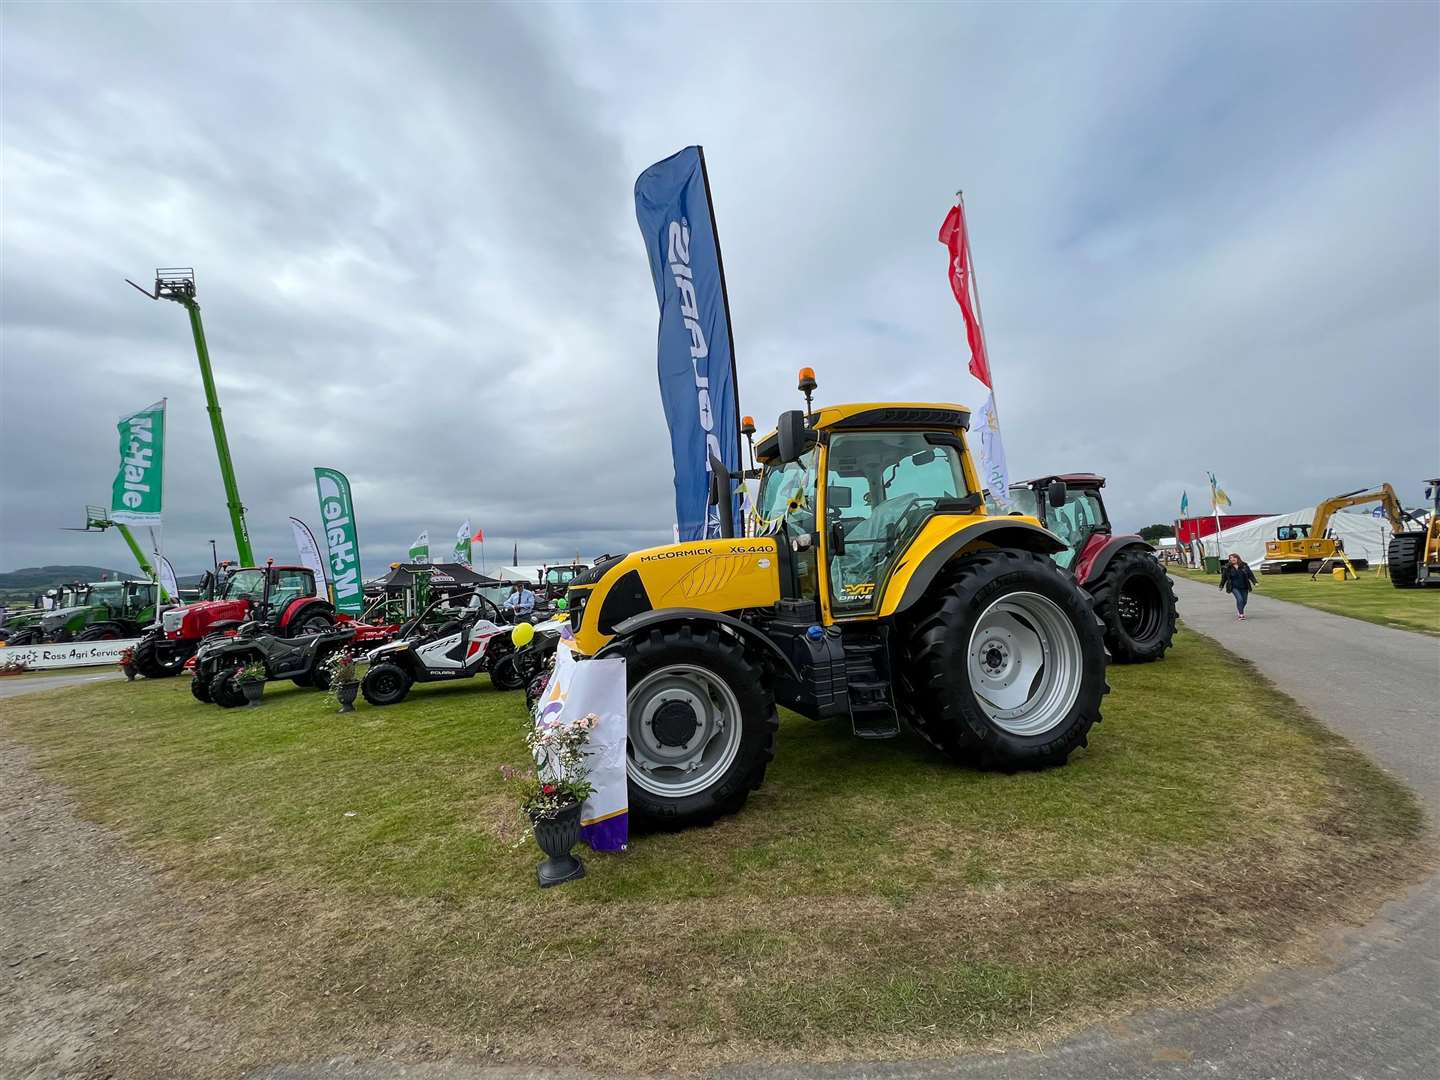 Deals worth tens of thousands of pounds are traditionally done at the event which offers an opportunity for suppliers to showcase their wares. Picture: Callum Mackay